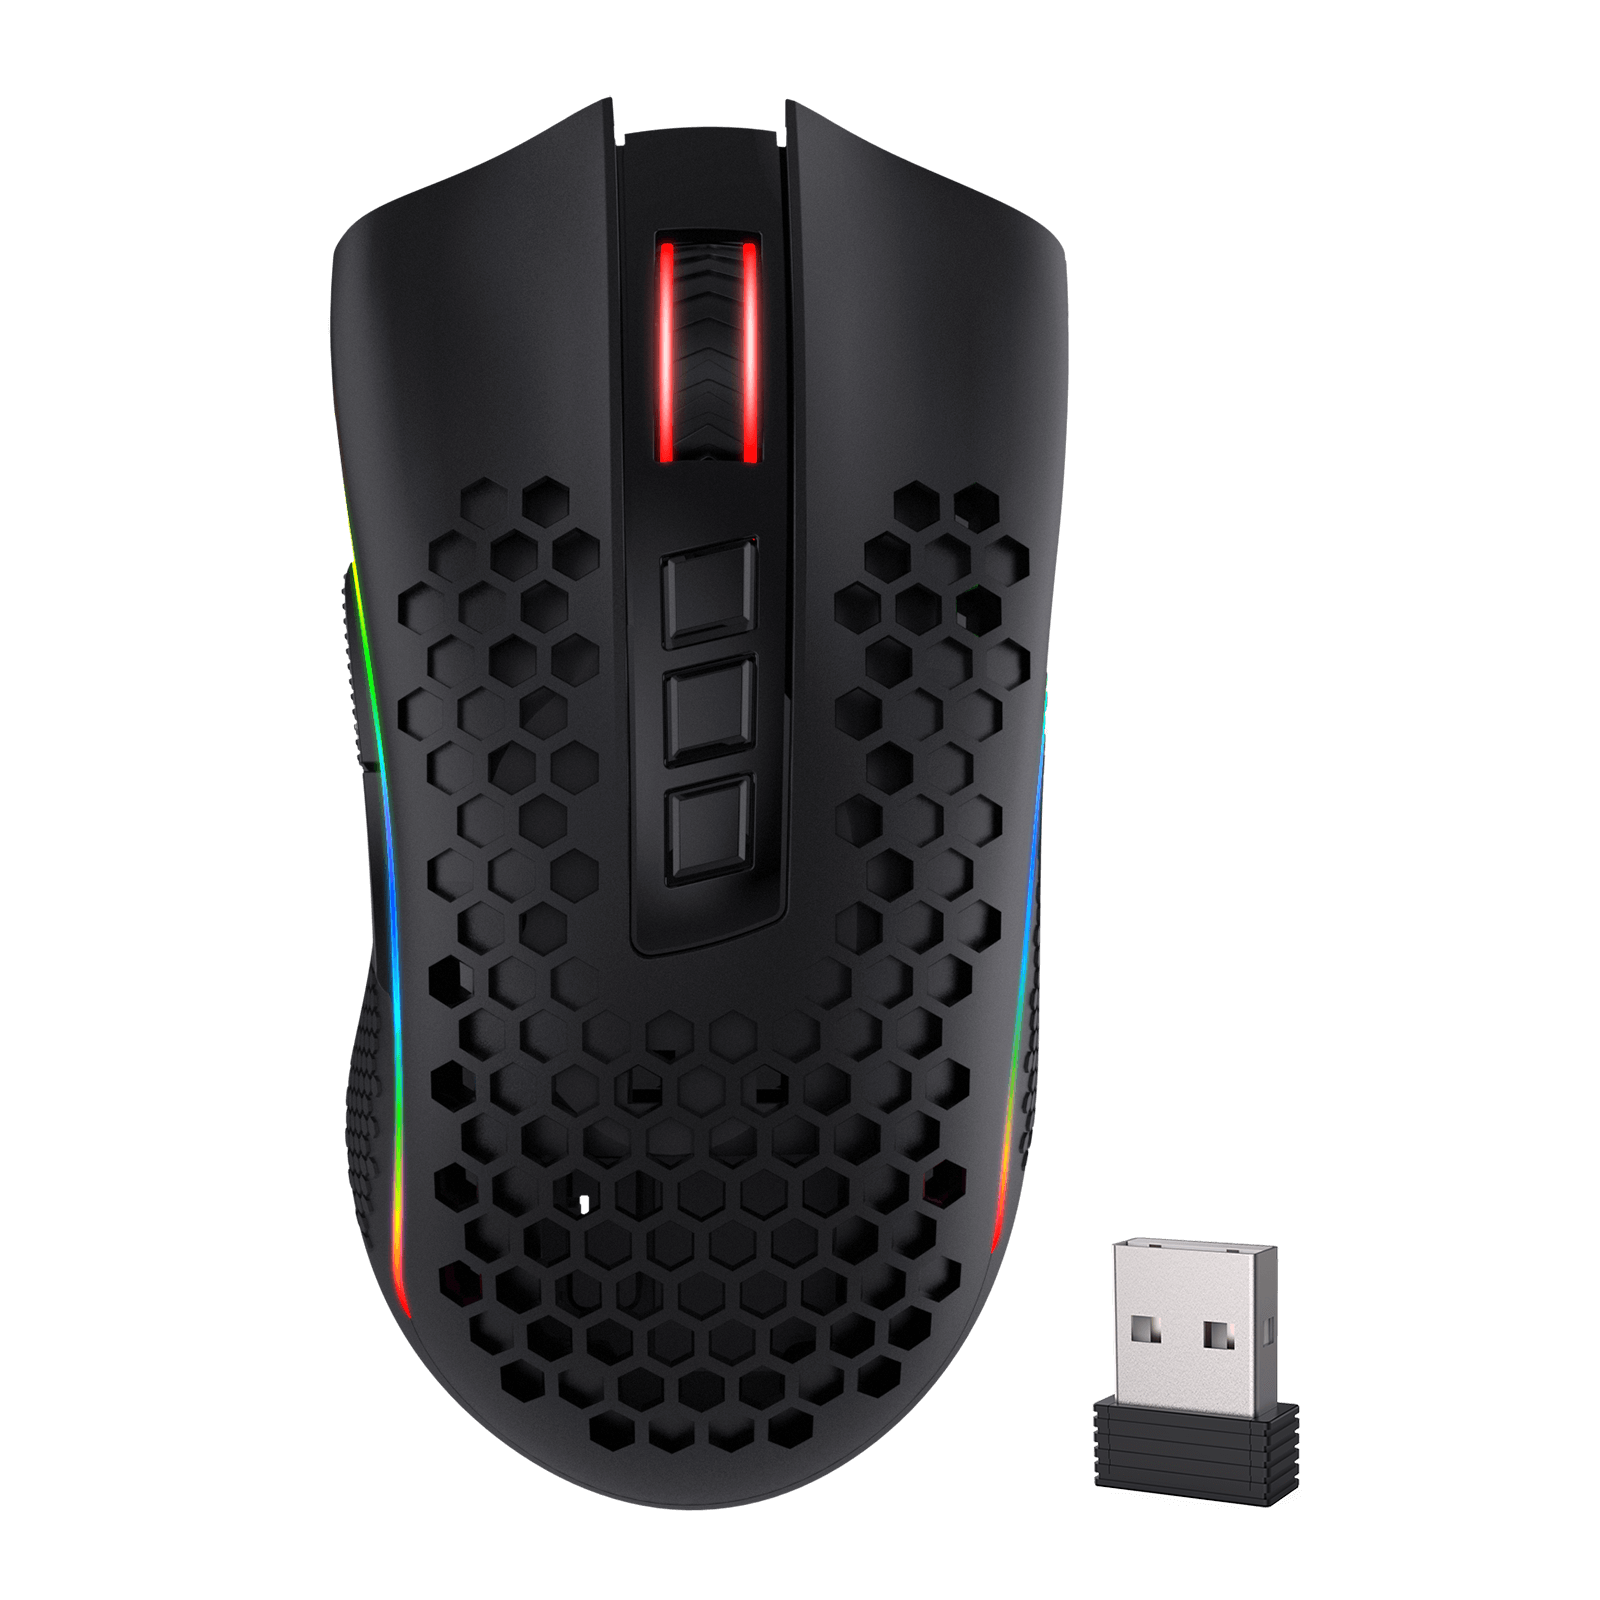 STORM PRO M808 RGB Wireless Gaming Mouse